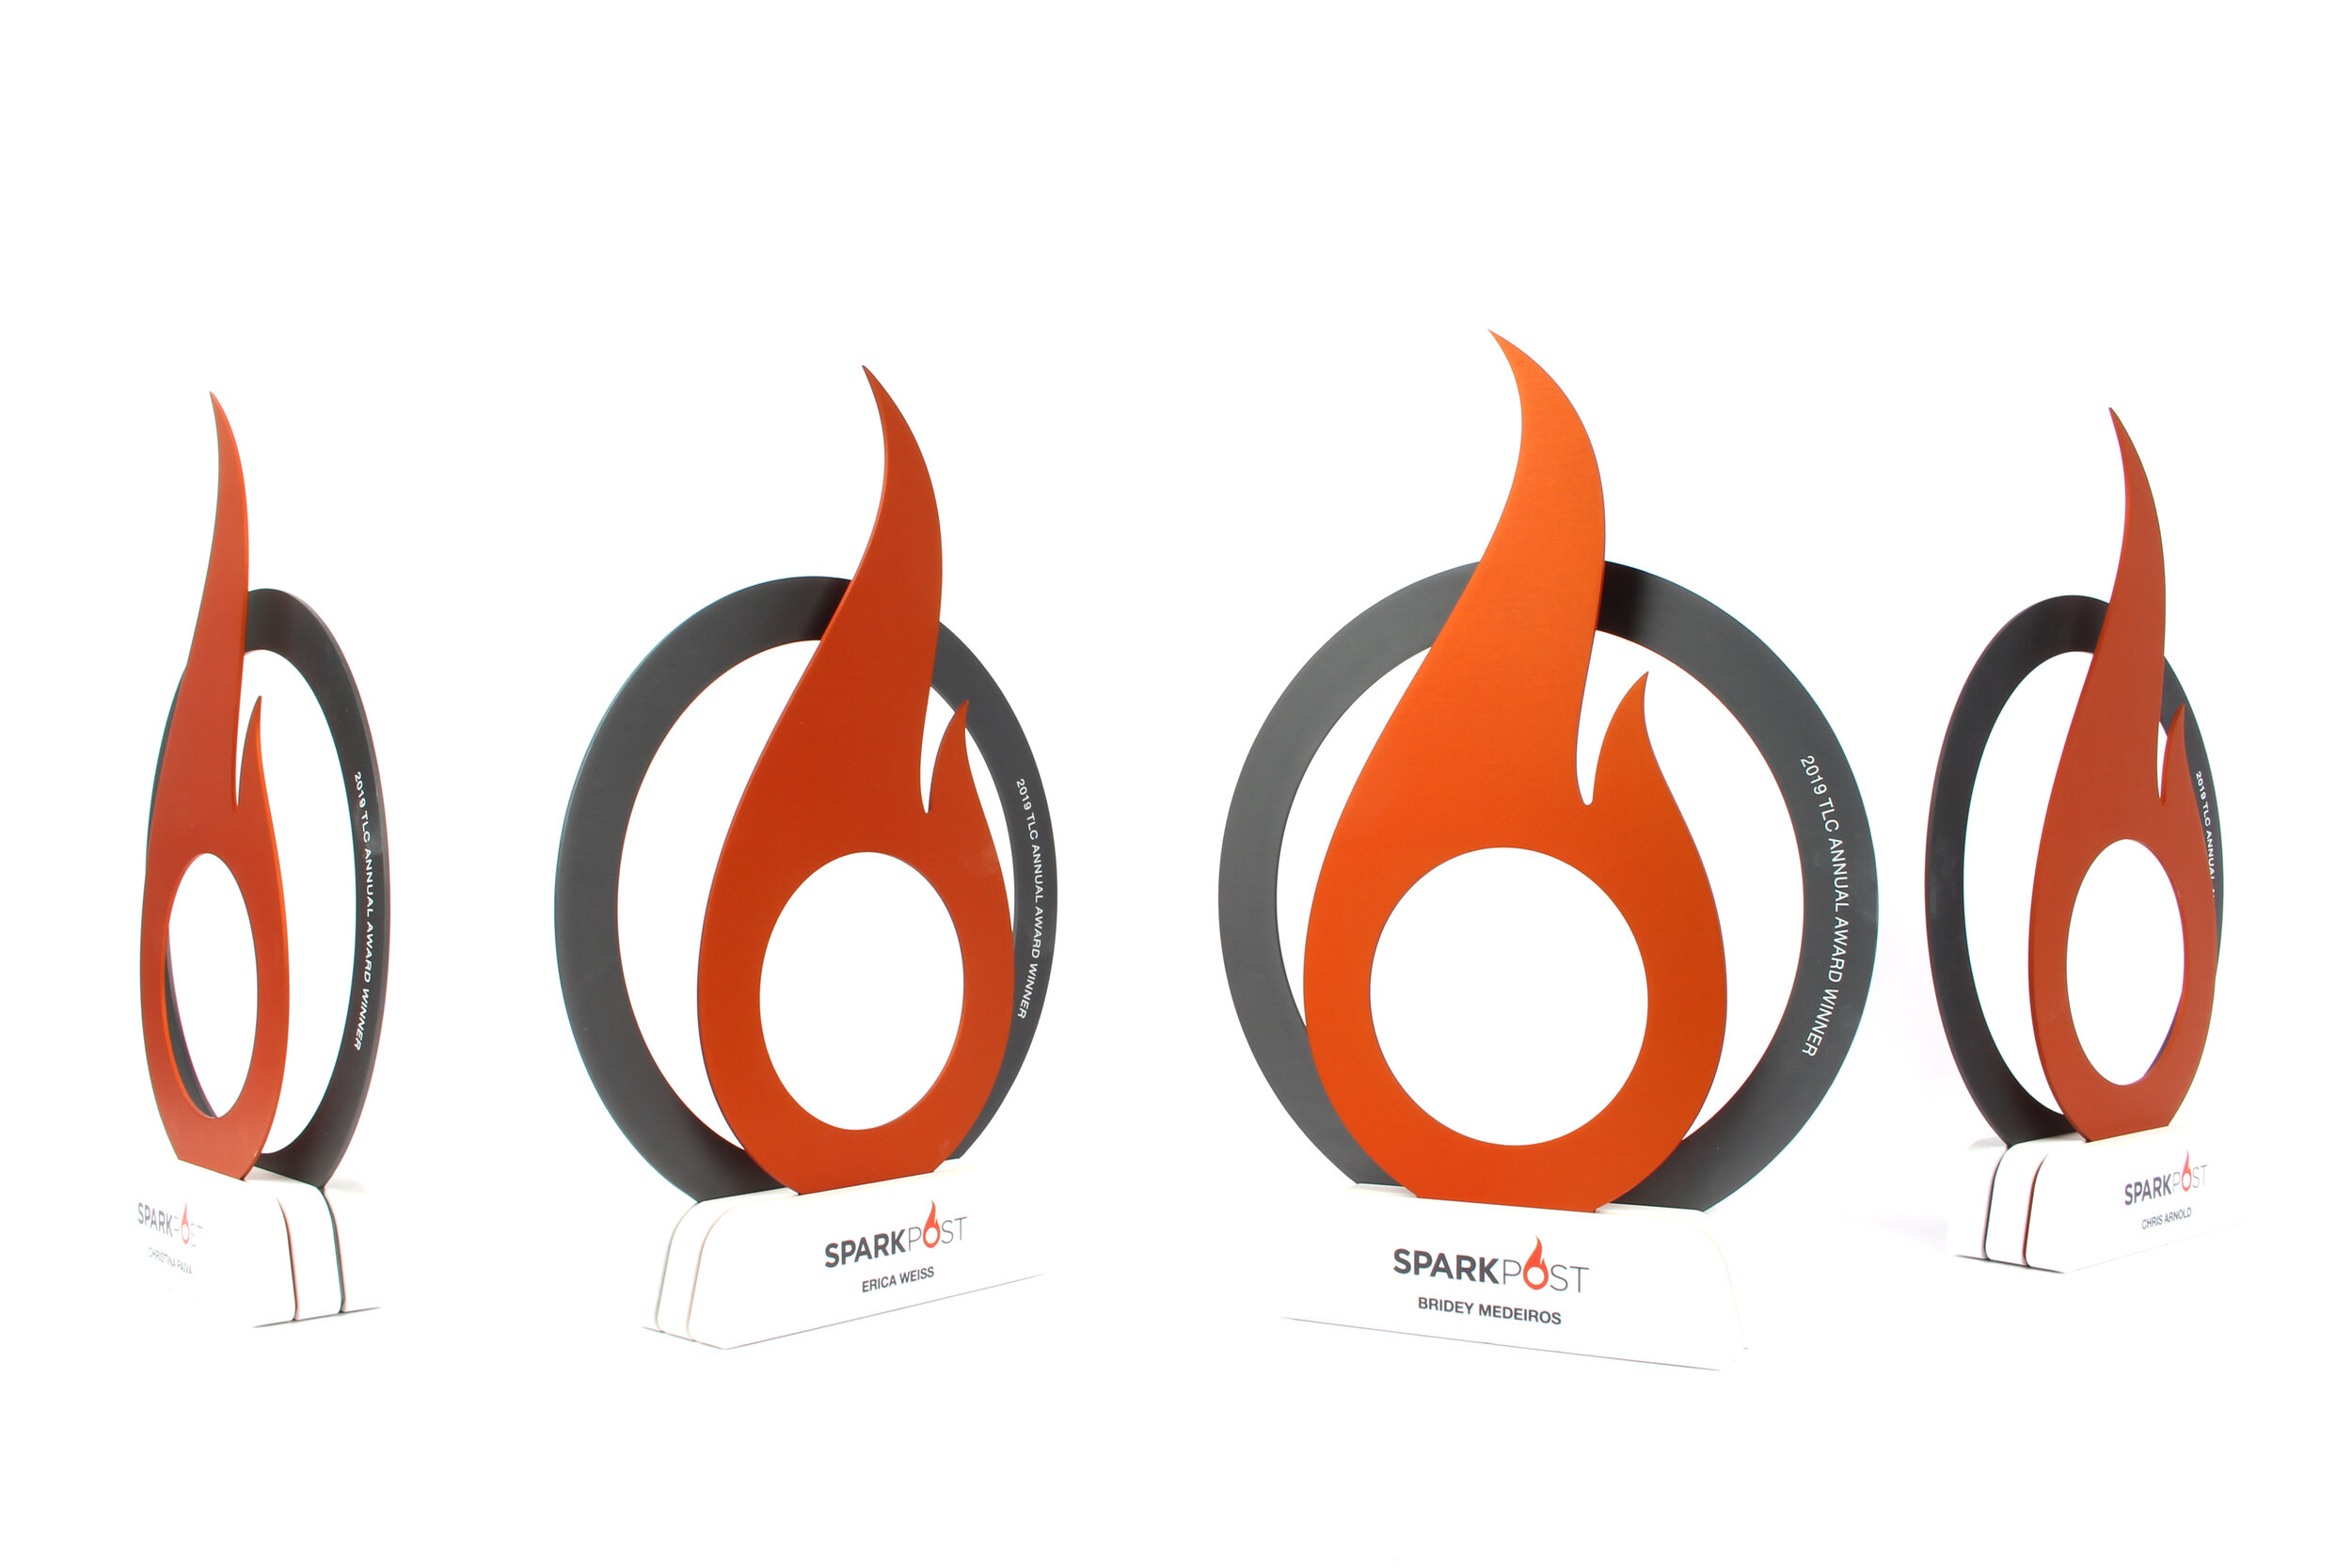 spark post modern corporate recognition for teamwork awards trophies 4